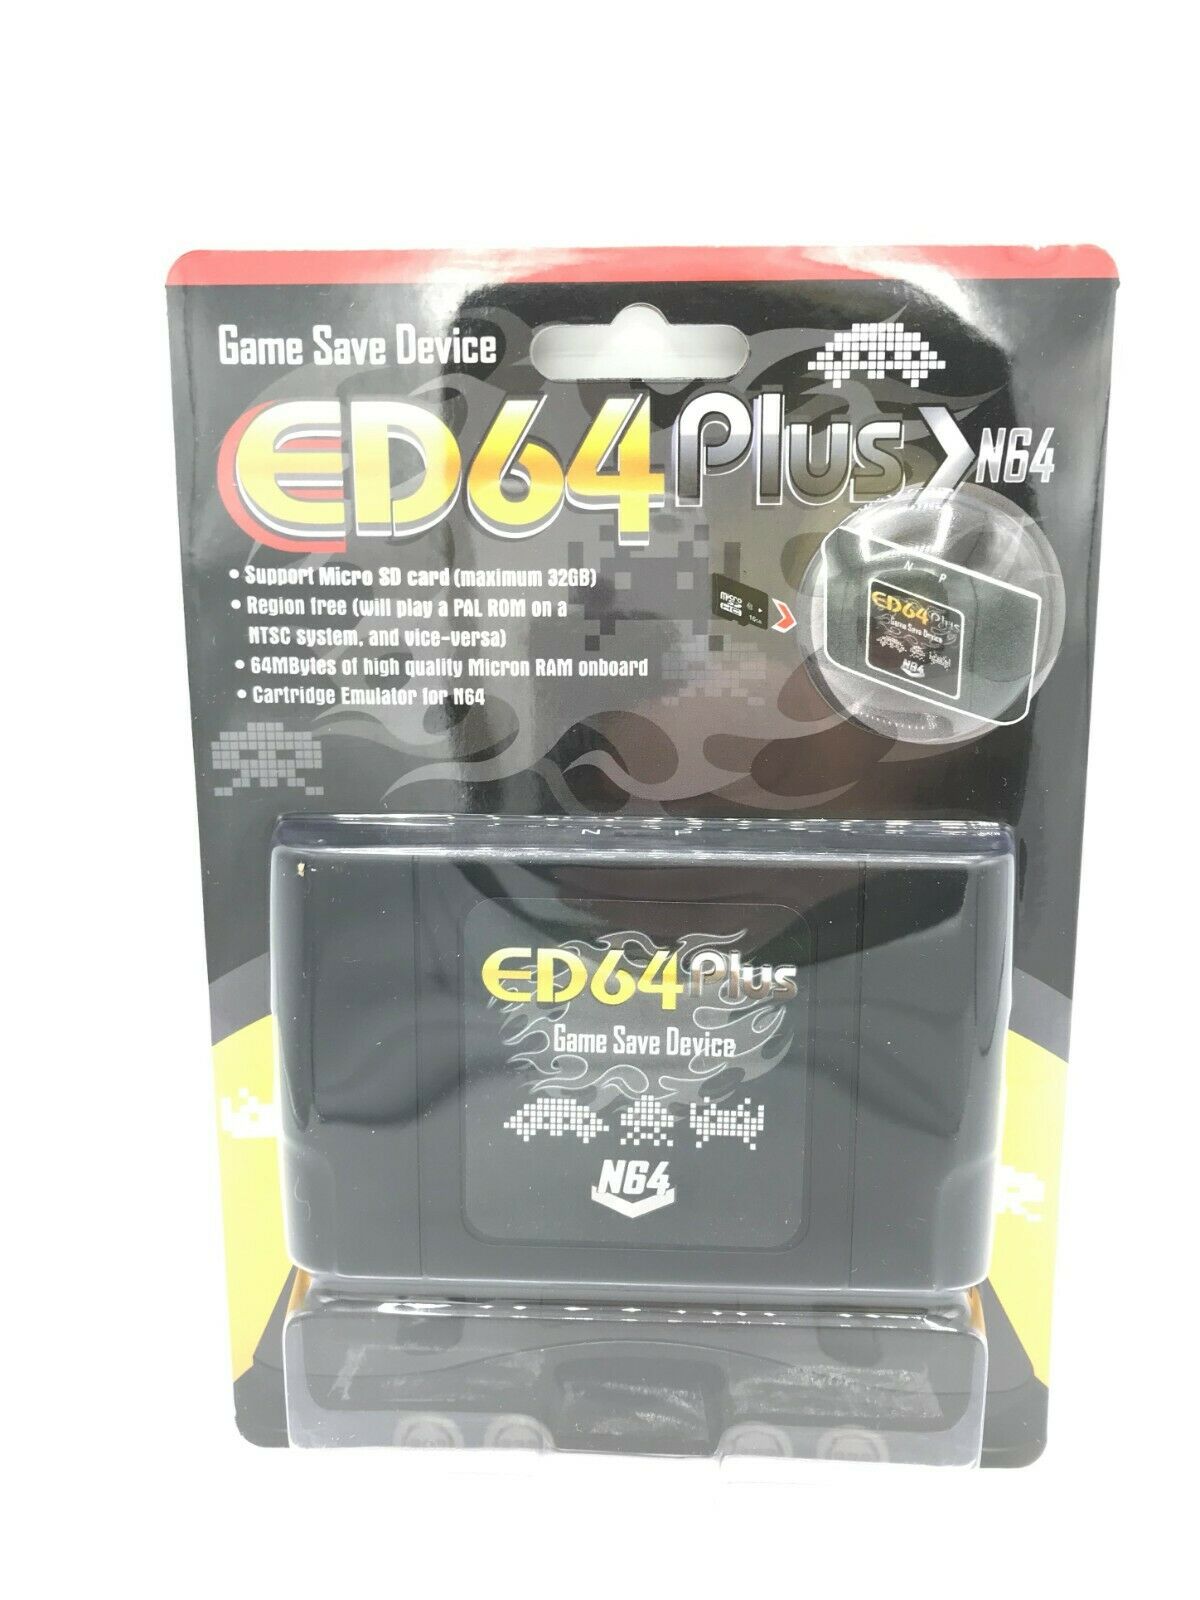 Ed64 Plus Everdrive Device For N64 ( 340 In 1) Free 16gb Micro Sd Fast Shipping